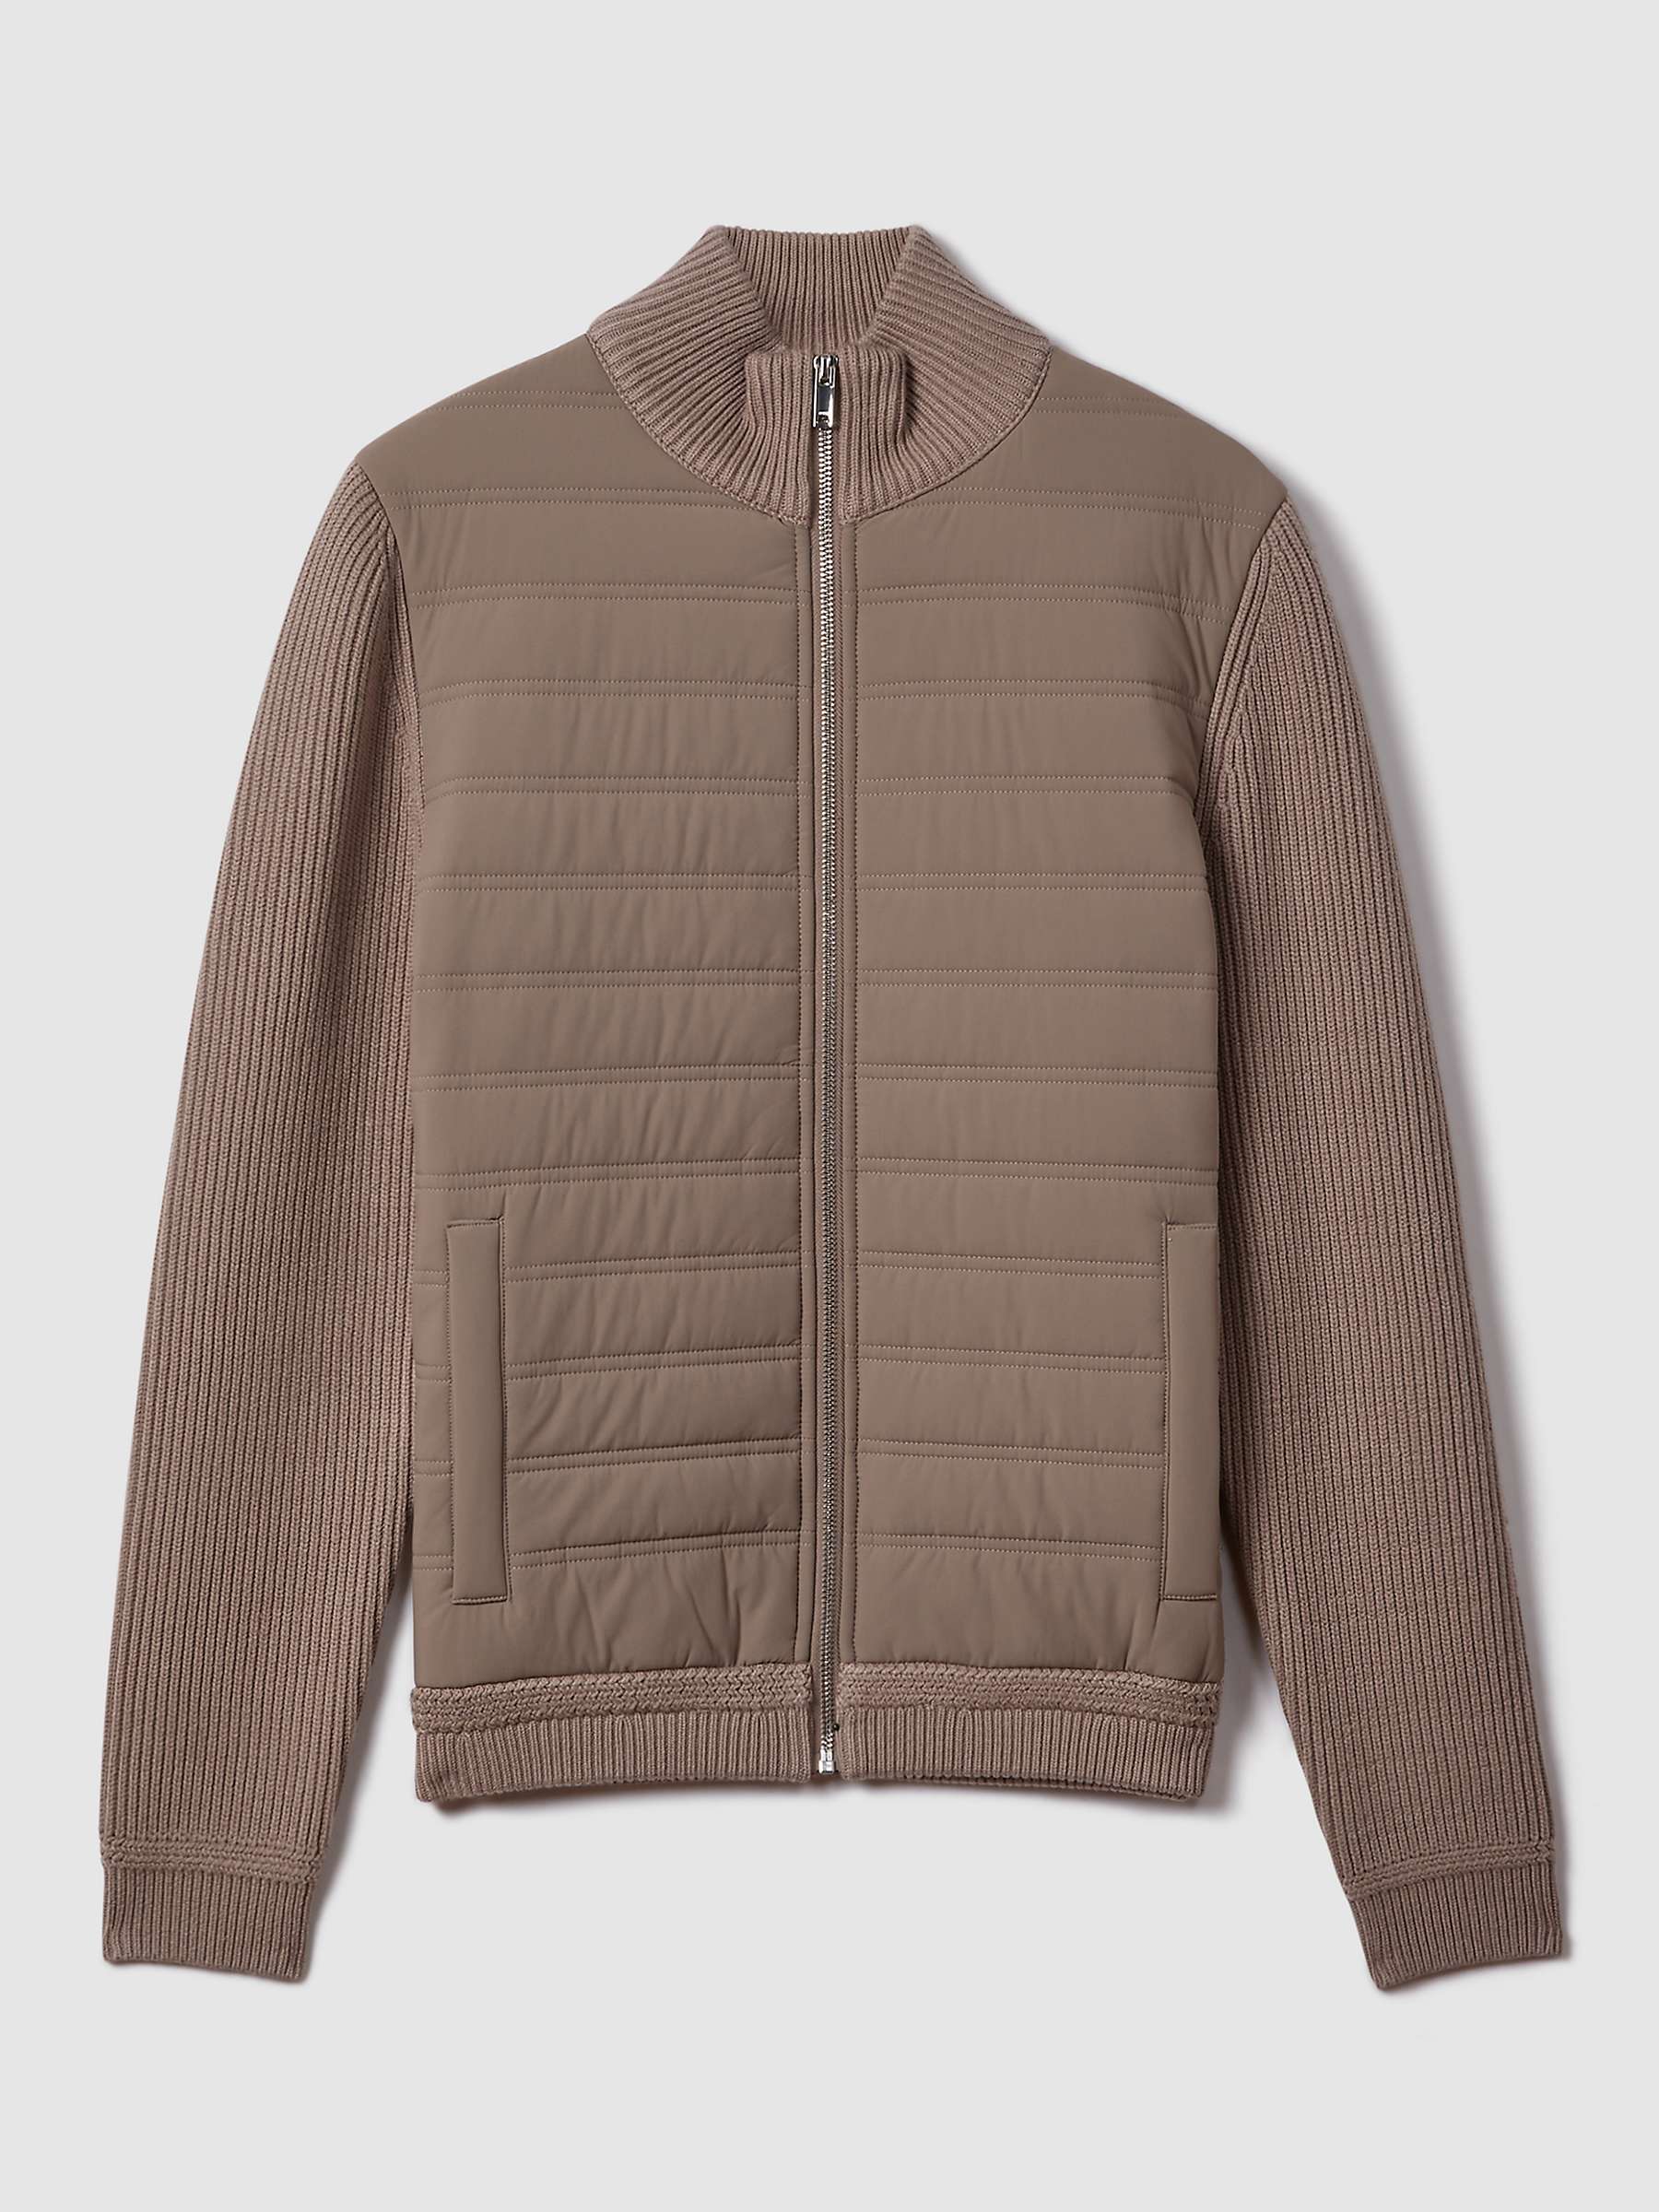 Buy Reiss Southend Long Sleeve Quilted Hybrid Jacket, Mink Online at johnlewis.com